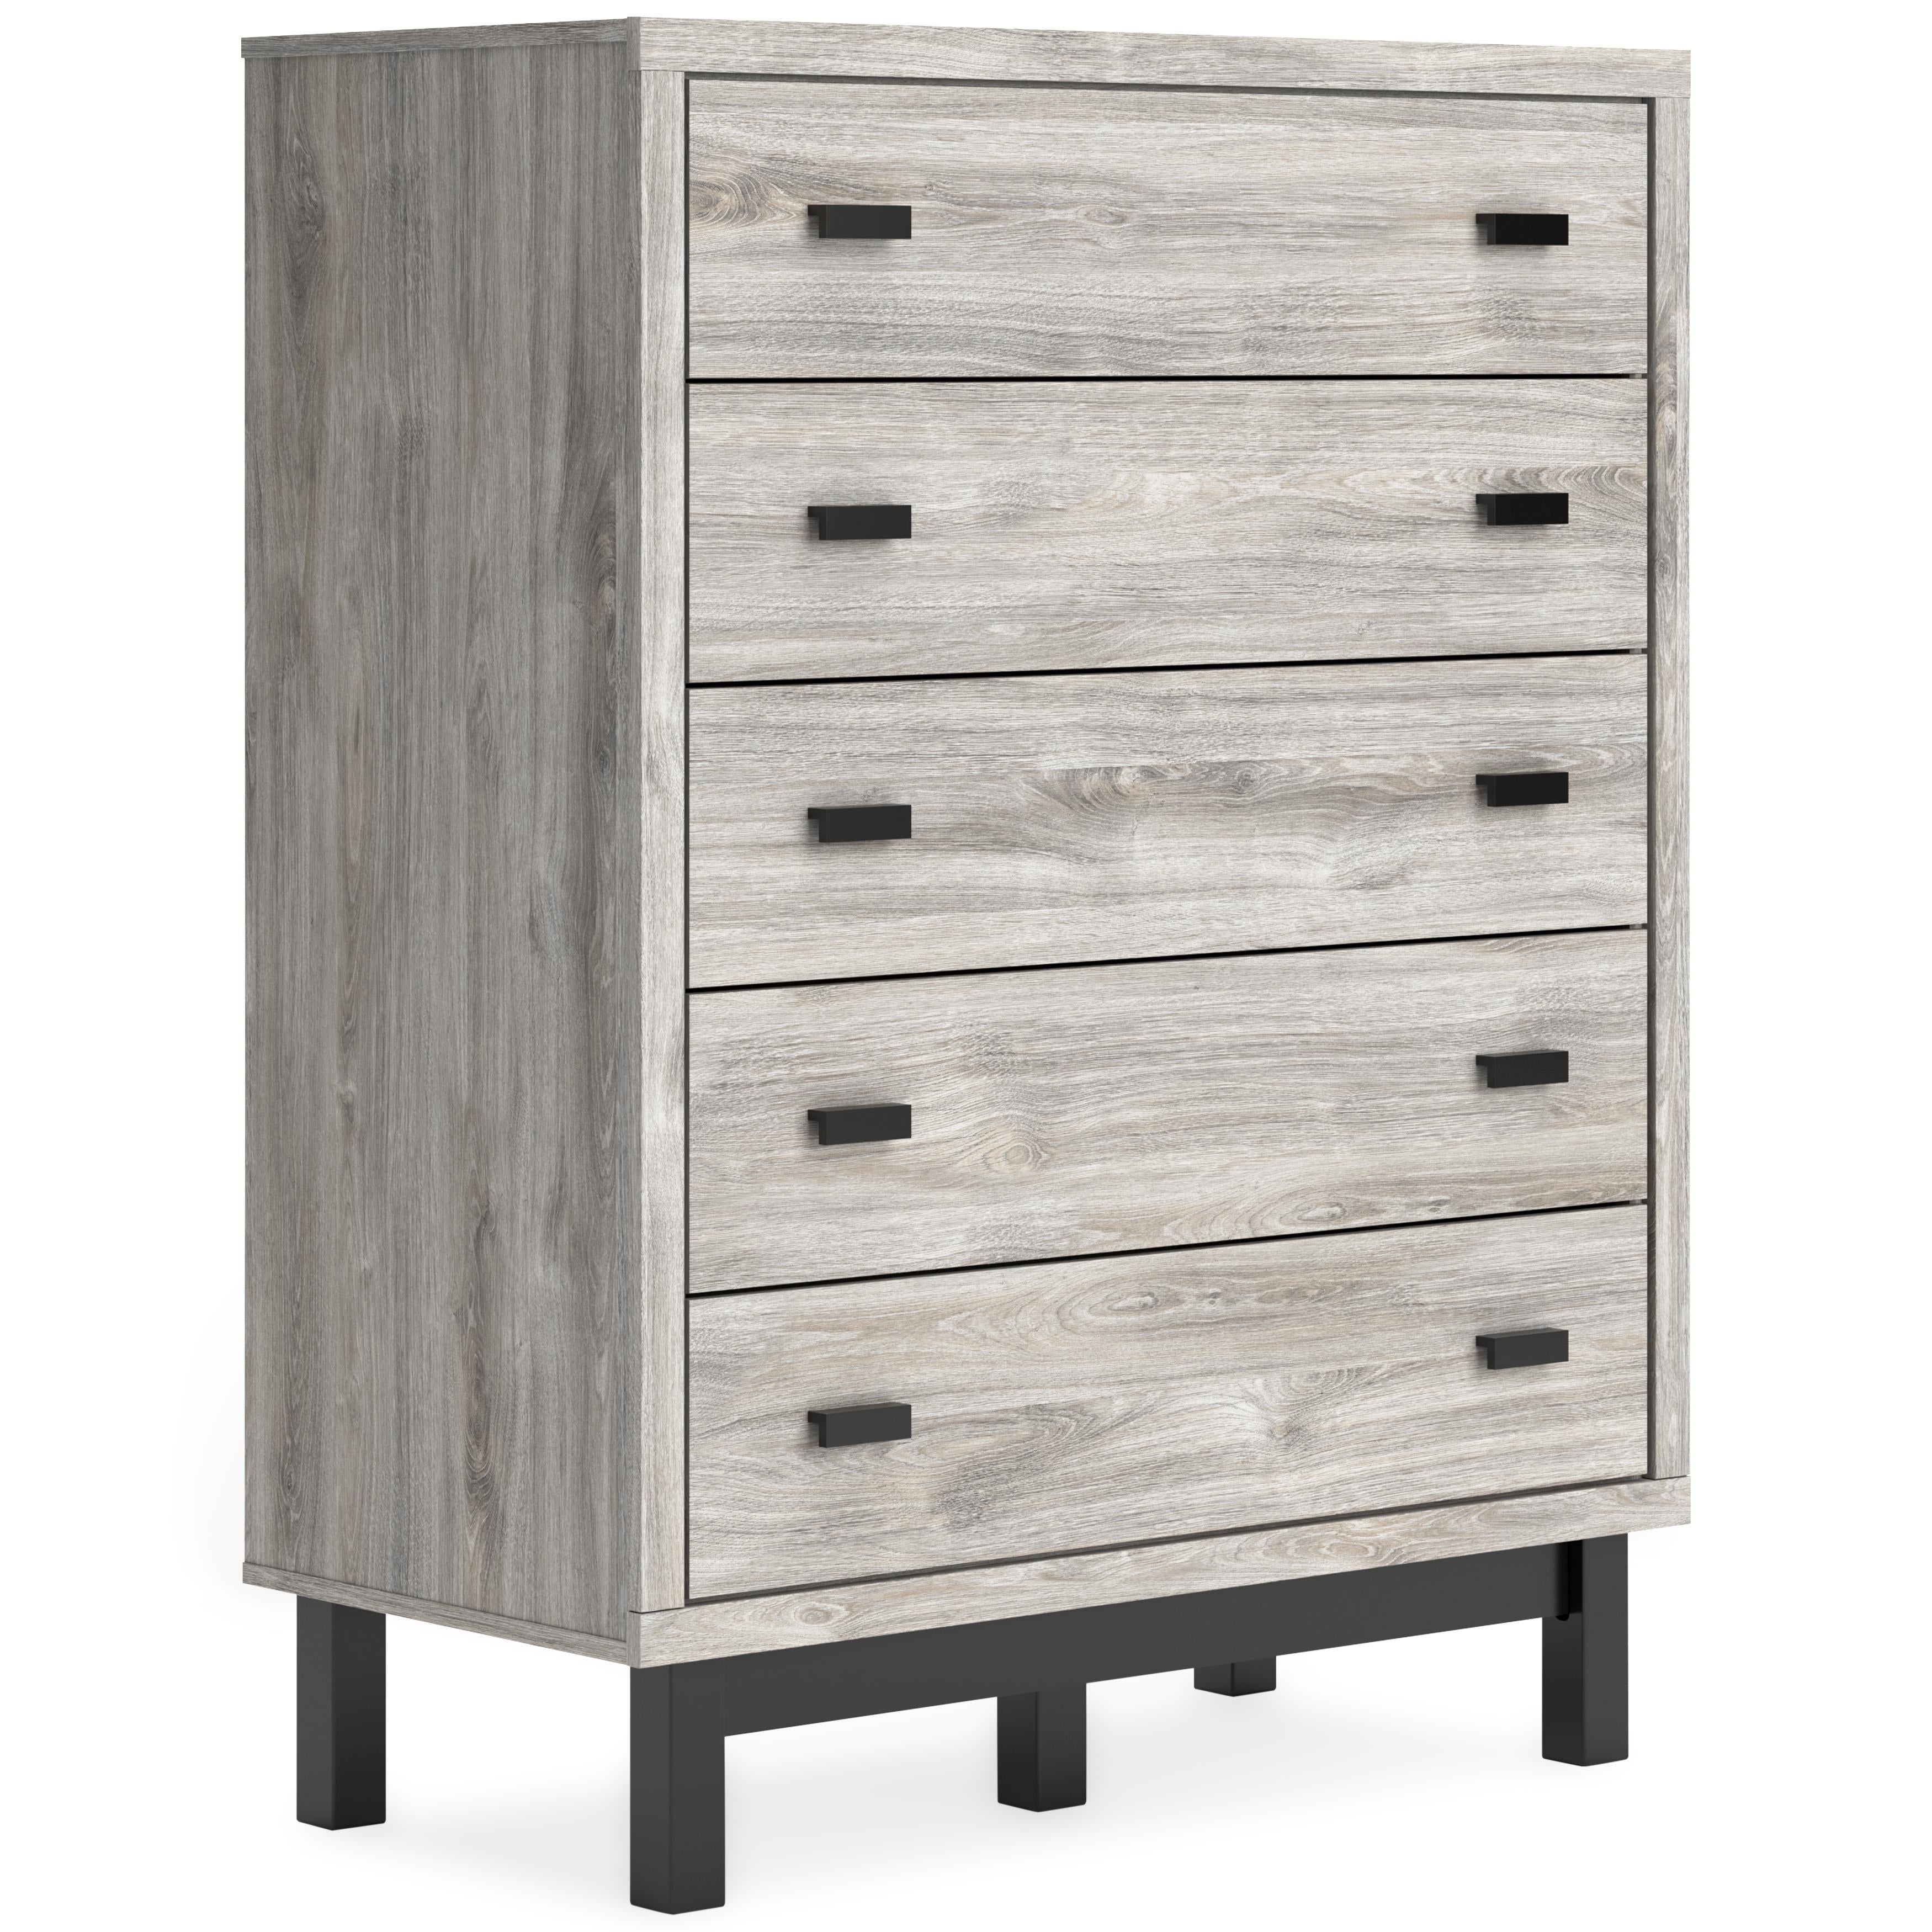 Lugo Assembled 5 Drawer Wide Chest